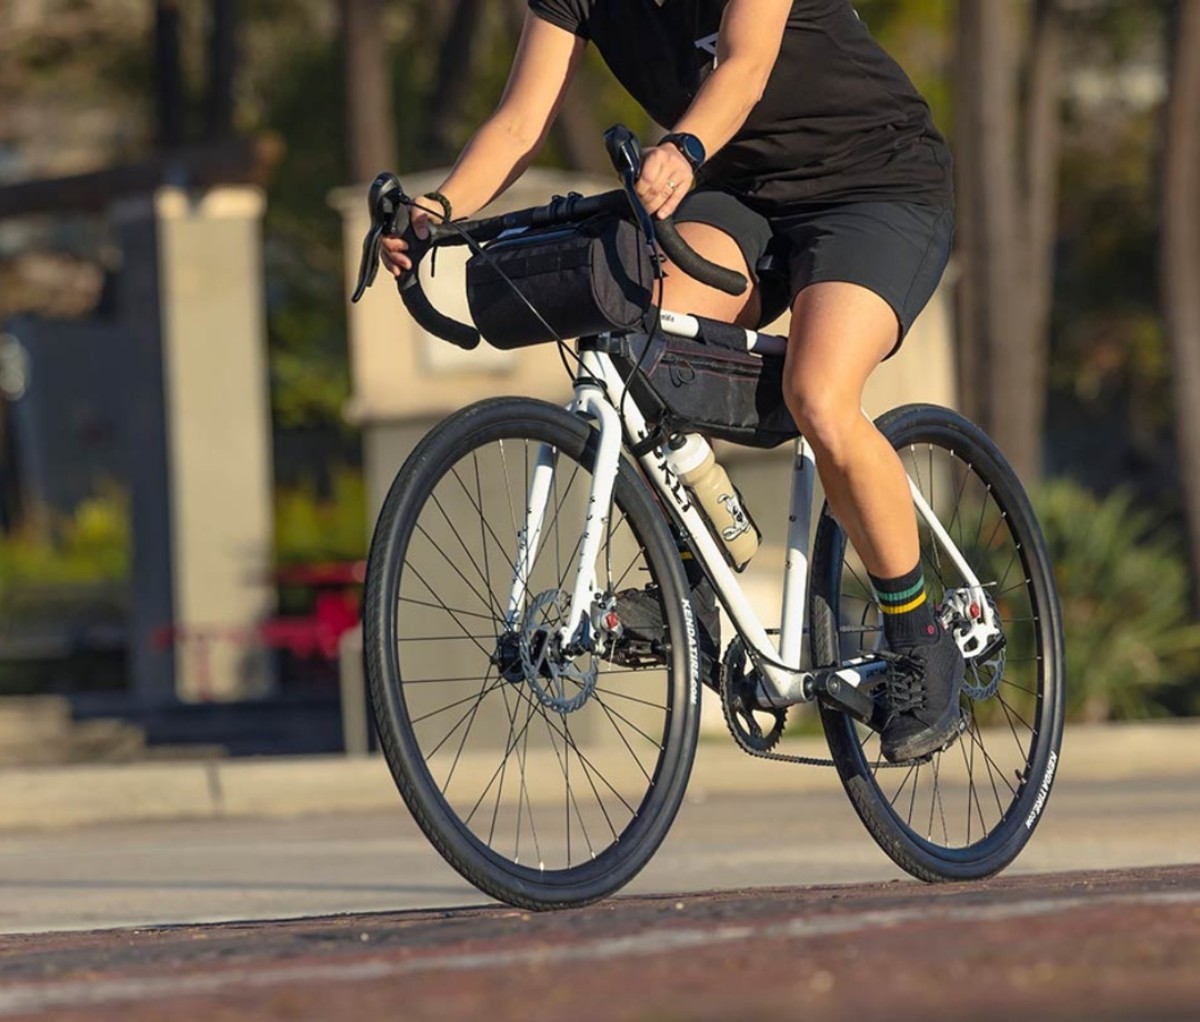 A person wearing black clothing riding a white Surly Preamble bike.